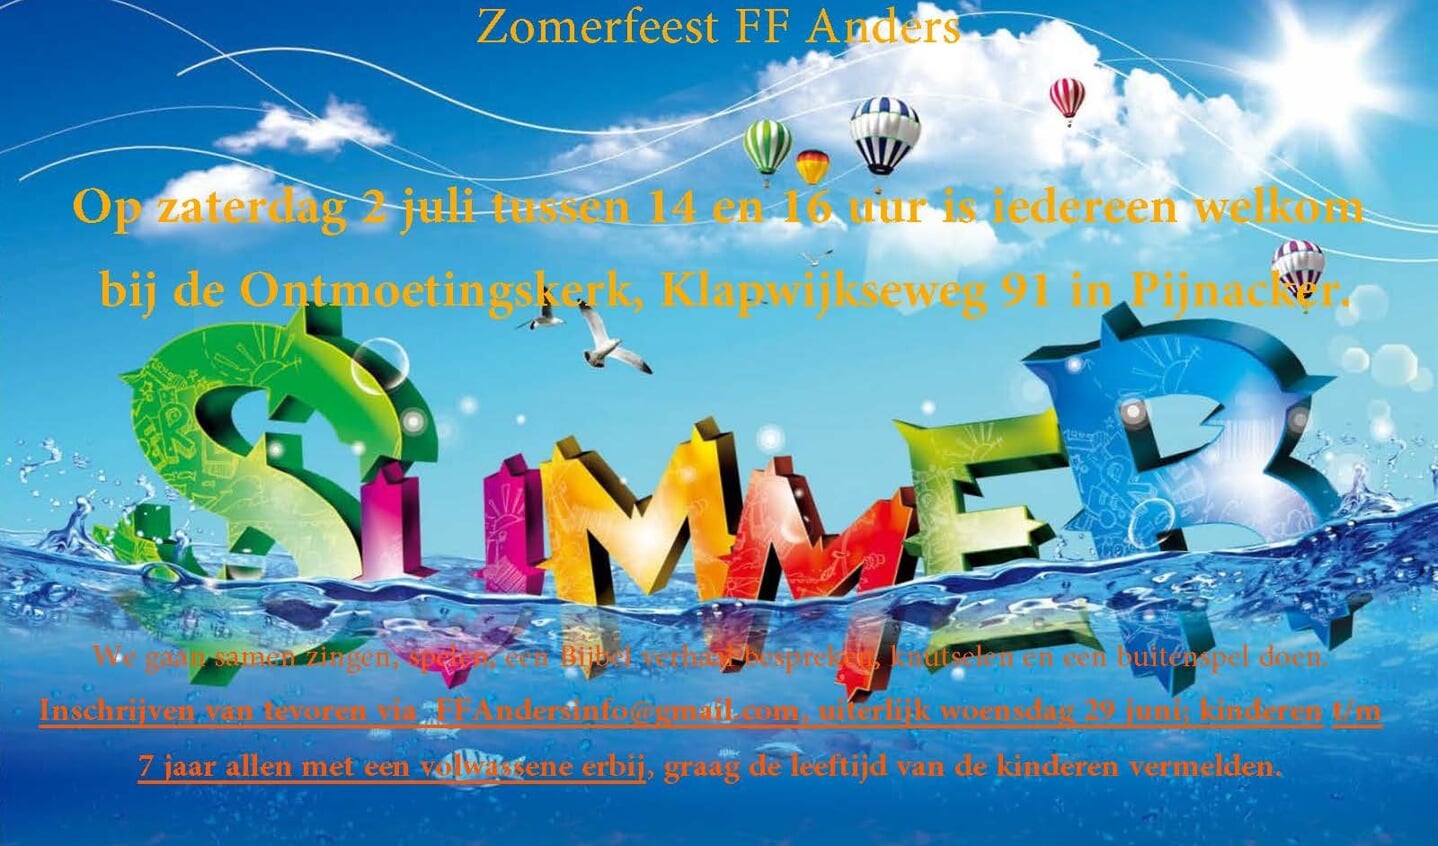 Zomerfeest FF Anders